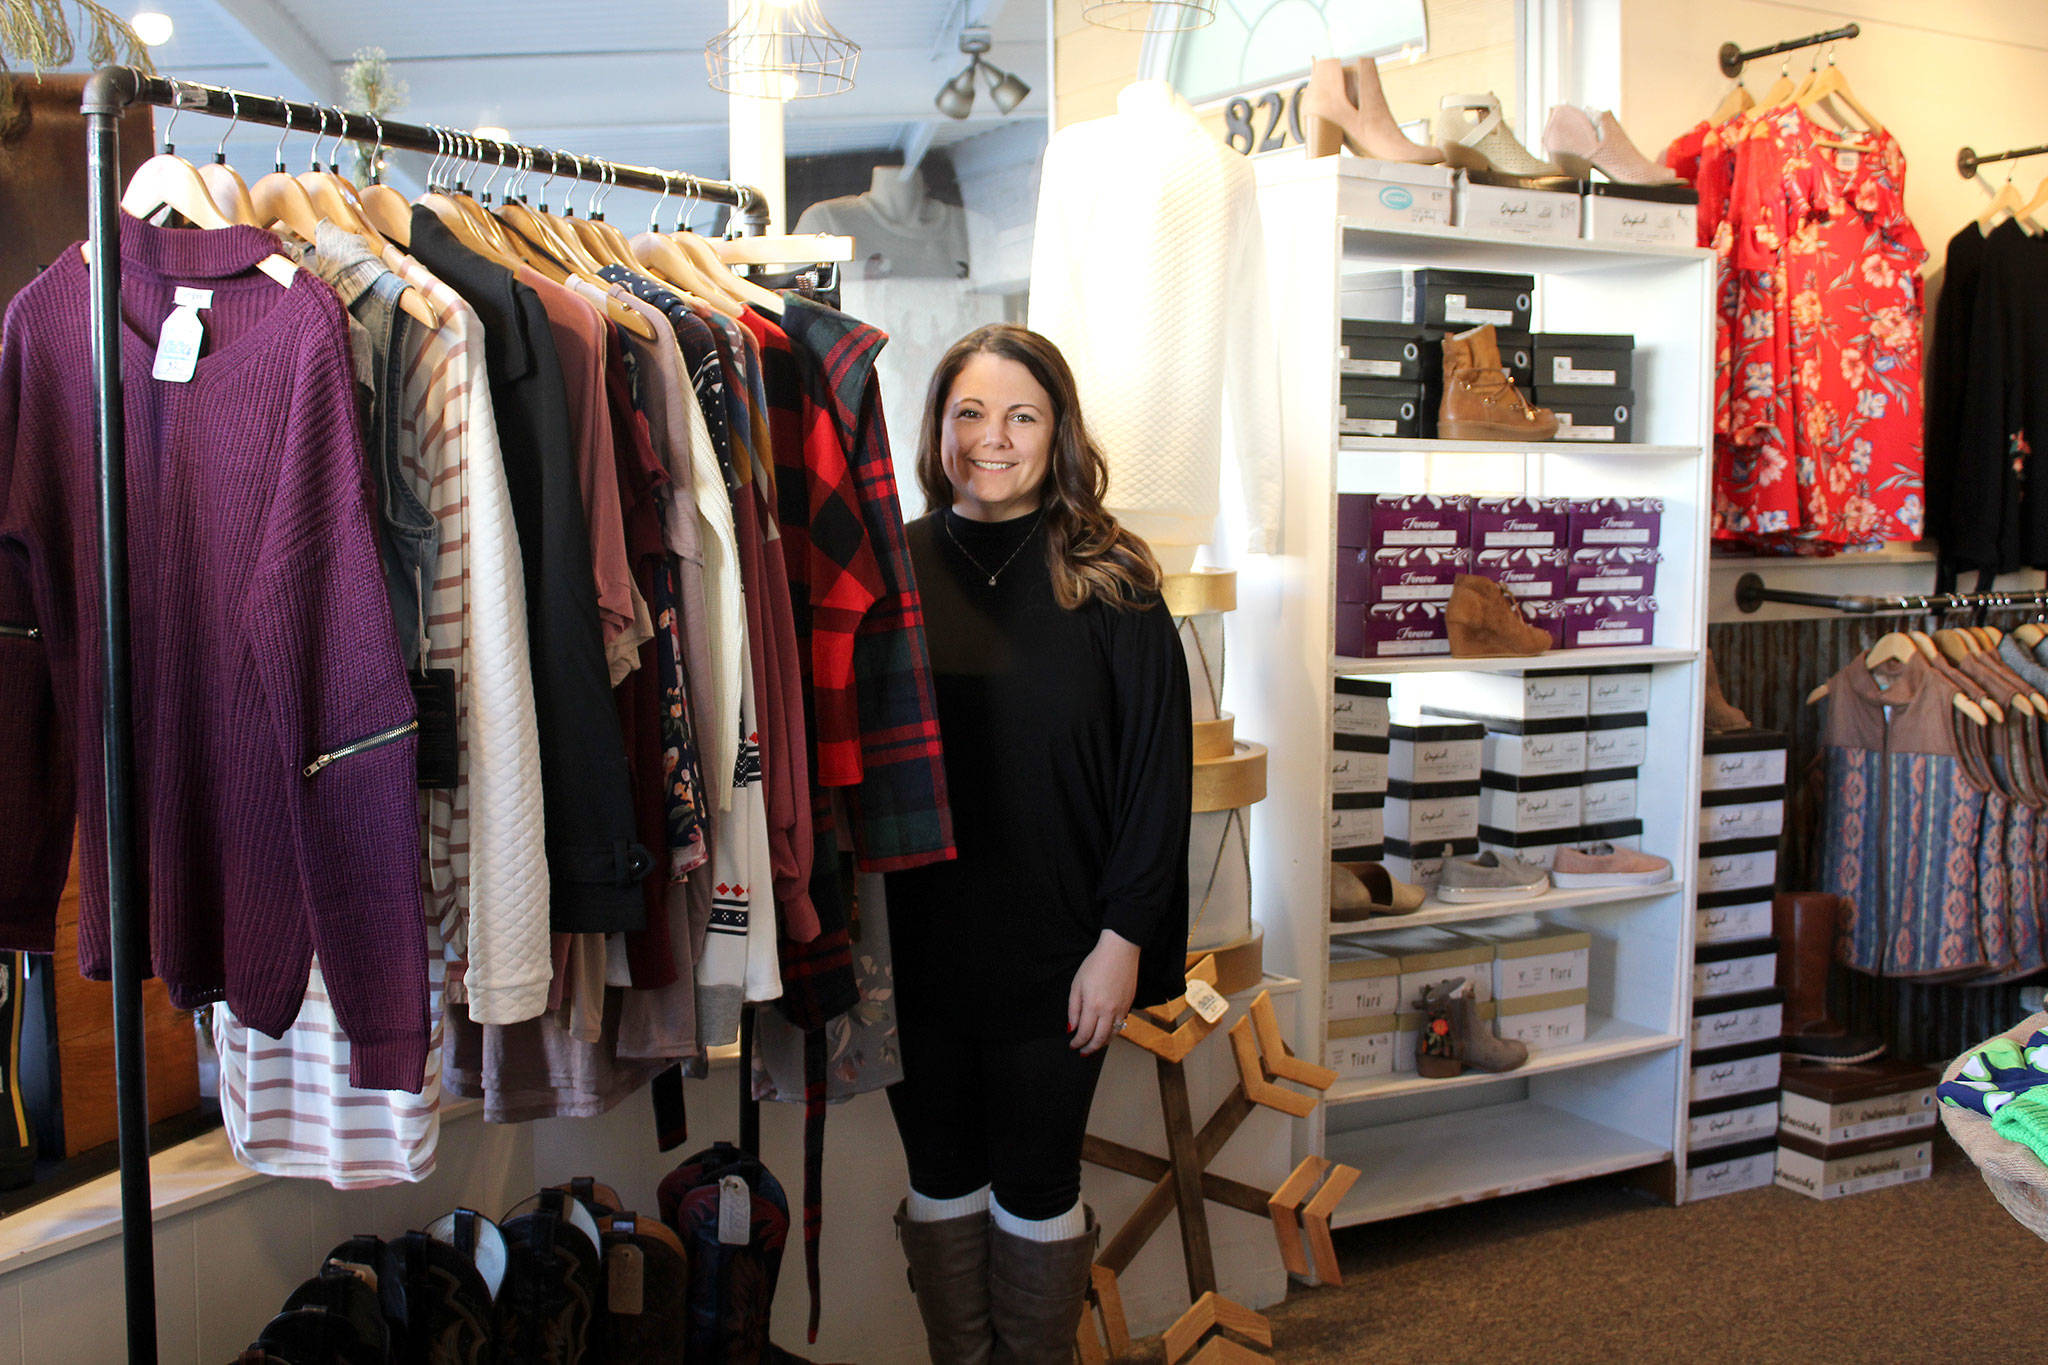 Danielle Gilchrist owns and manages Gigi’s Emporium PNW, as well as being a full-time teacher. &lt;em&gt;(Michelle Beahm | Kitsap Daily News)&lt;/em&gt;